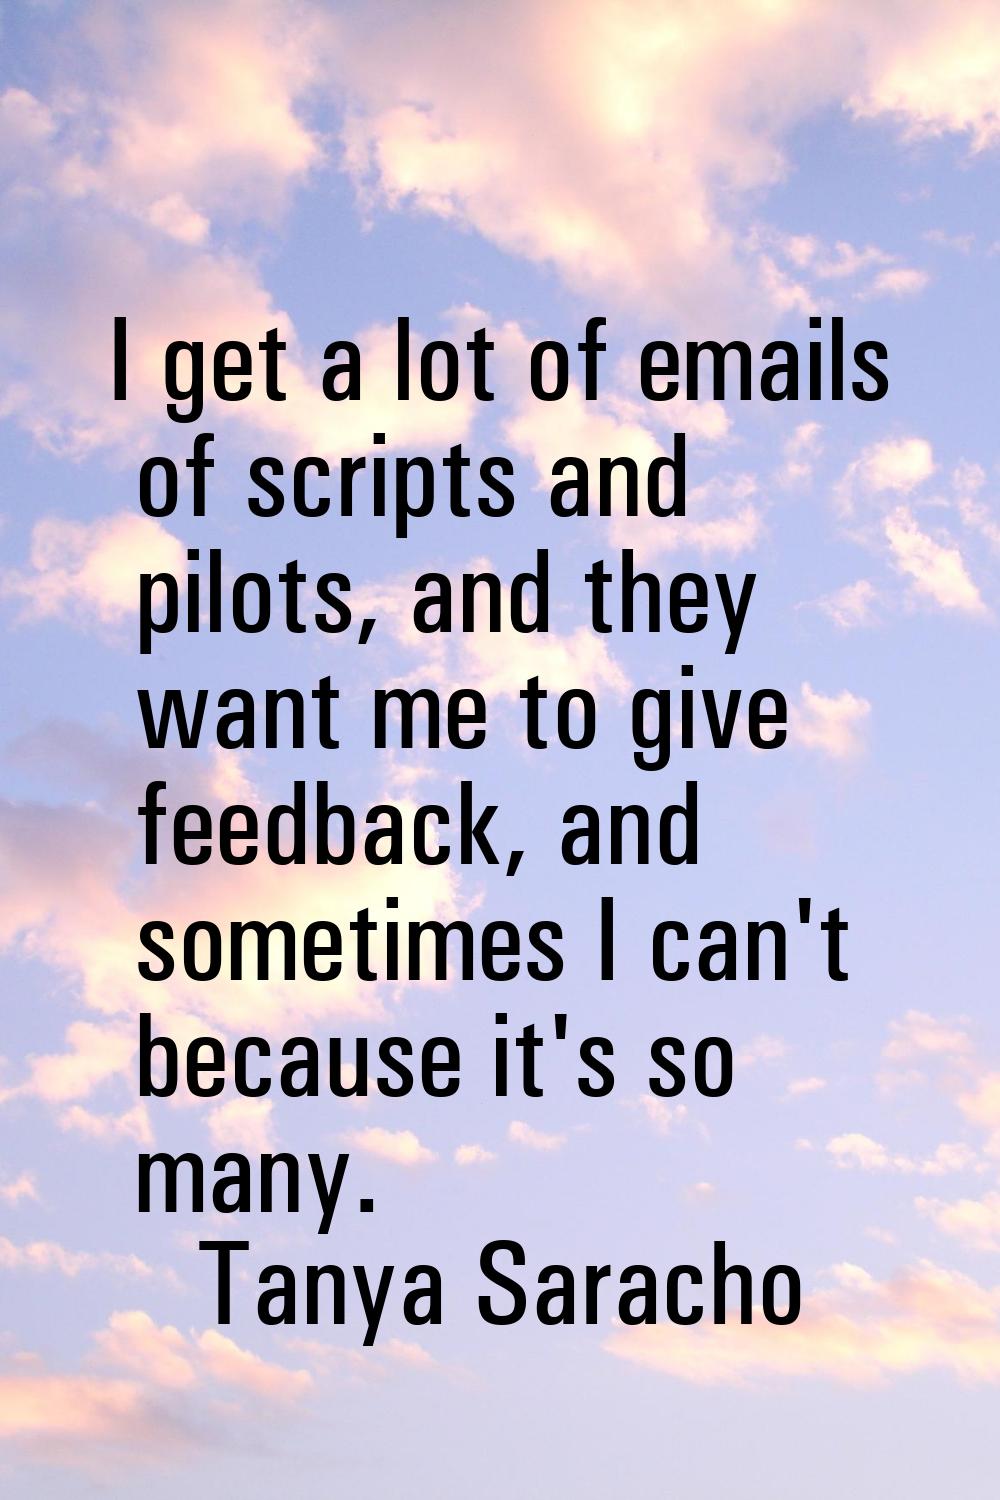 I get a lot of emails of scripts and pilots, and they want me to give feedback, and sometimes I can